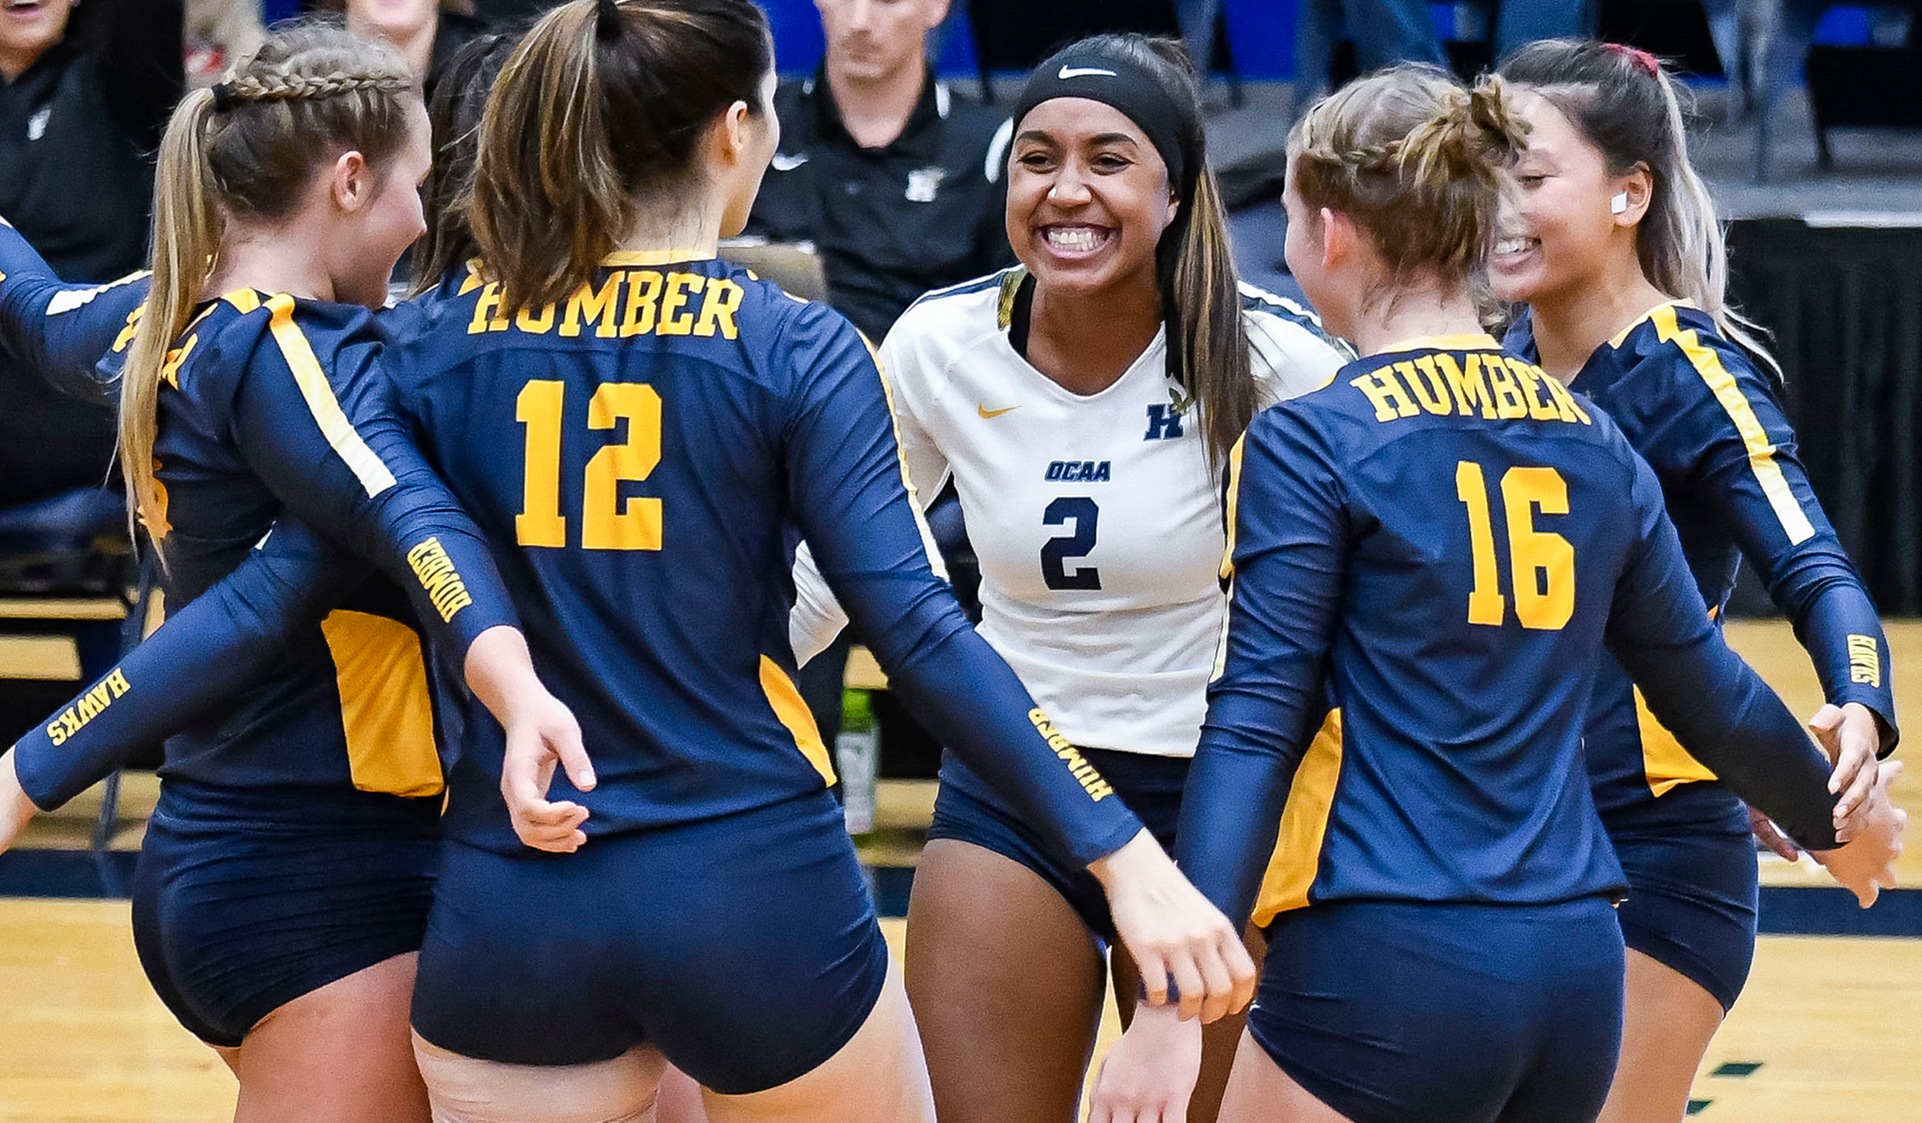 HAWKS EXPLODE AFTER TIGHT FIRST SET IN 3-0 ROAD WIN OVER SHERIDAN